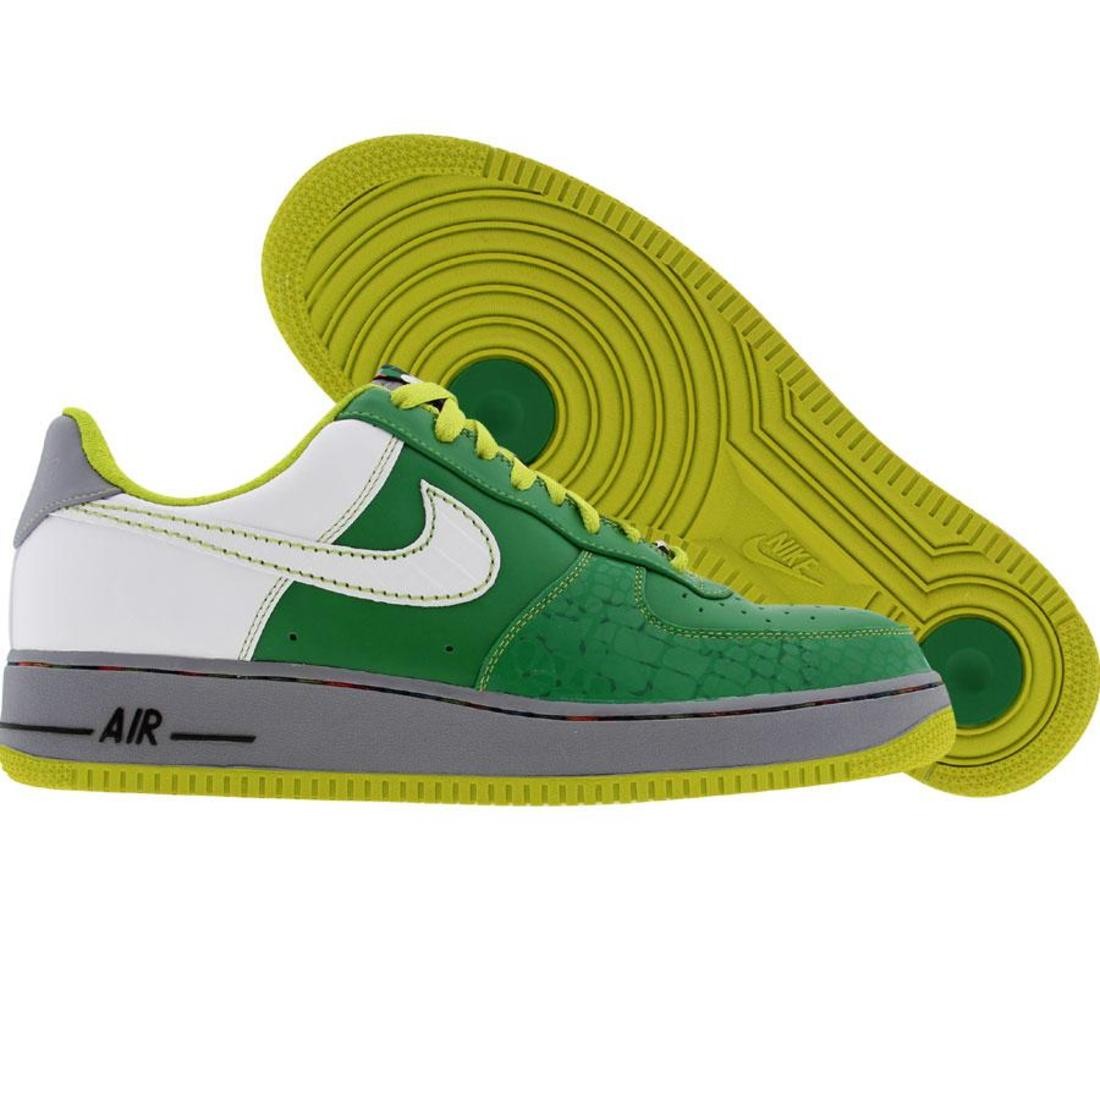 Nike Air Force 1 07 Low Premium New York City Edition (classic green / white / radiant green / stealth)